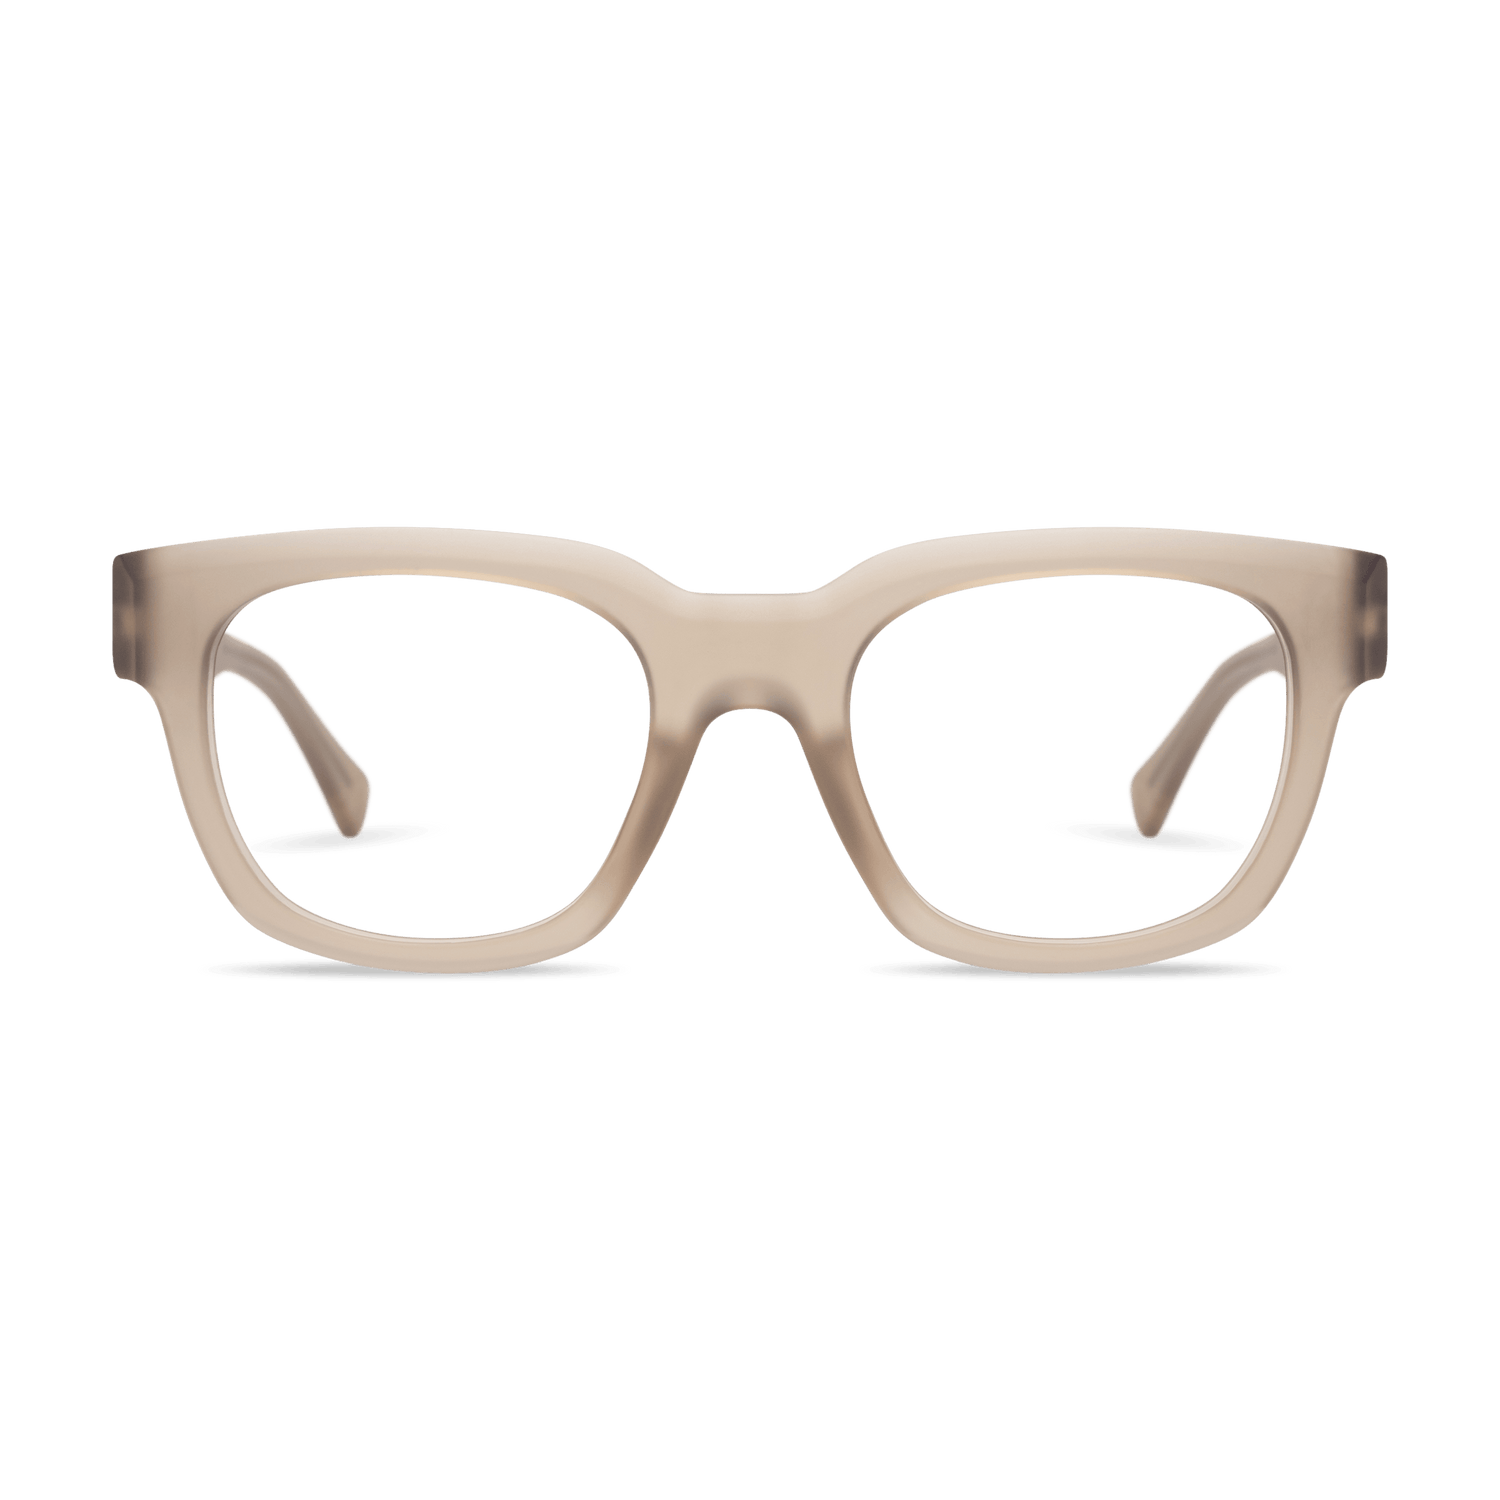 Kaine Readers READING GLASSES LOOK OPTIC (Taupe) +1.00 